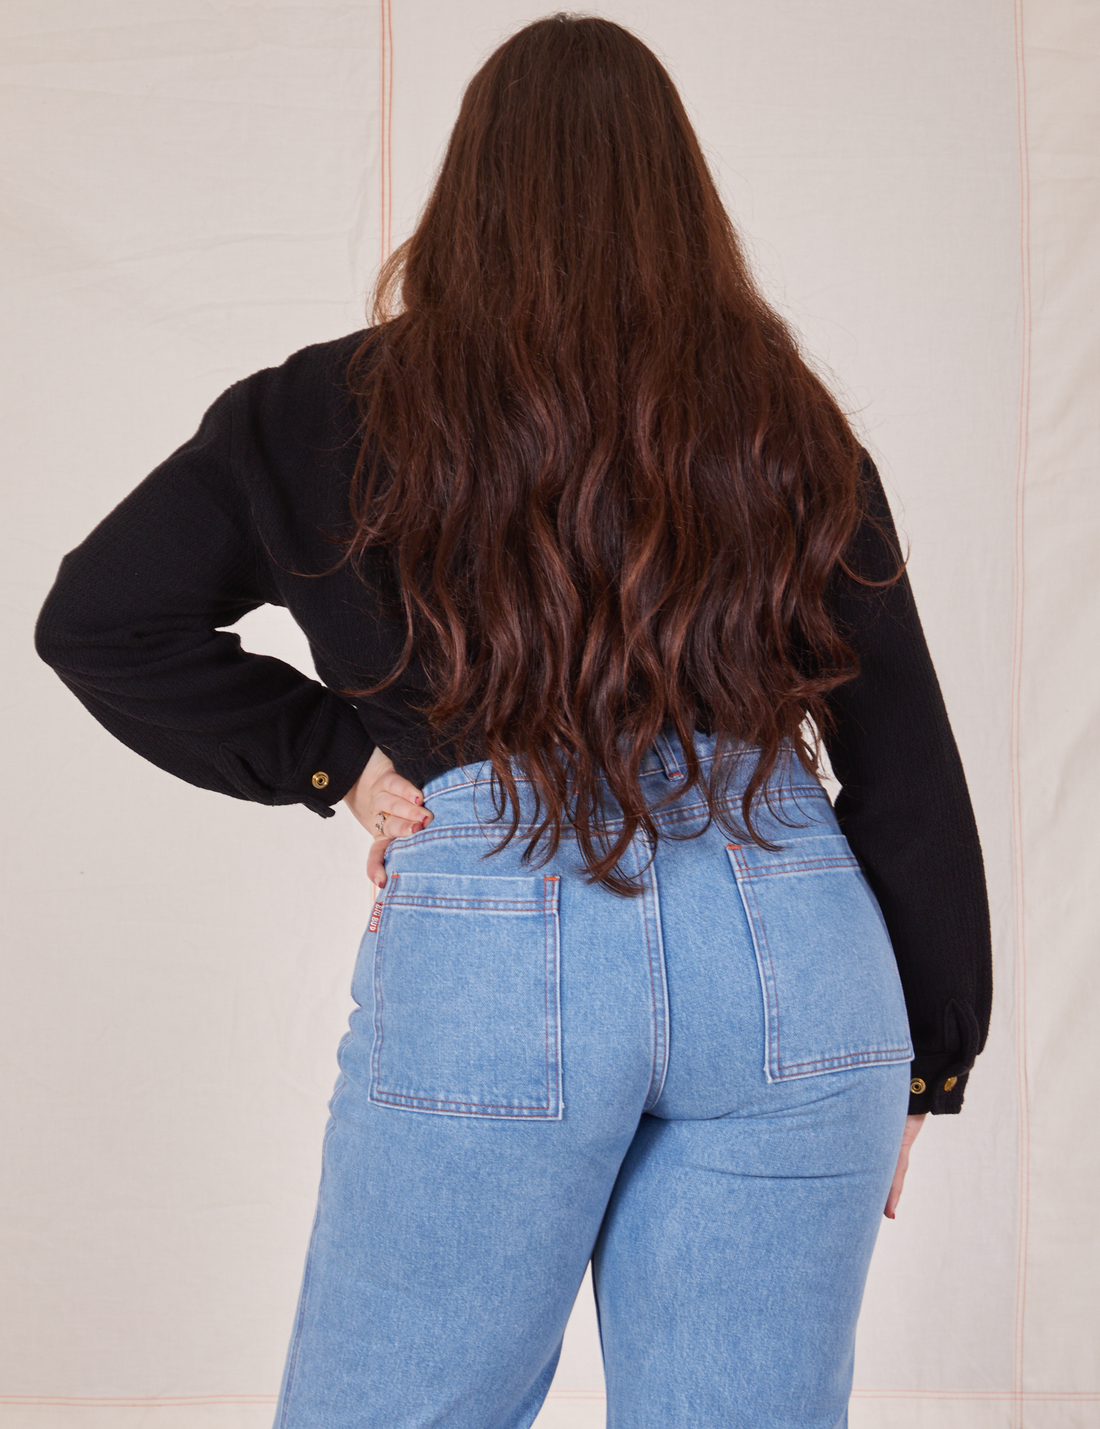 Back view of Ricky Jacket in Basic Black and light wash Sailor Jeans worn by Sydney